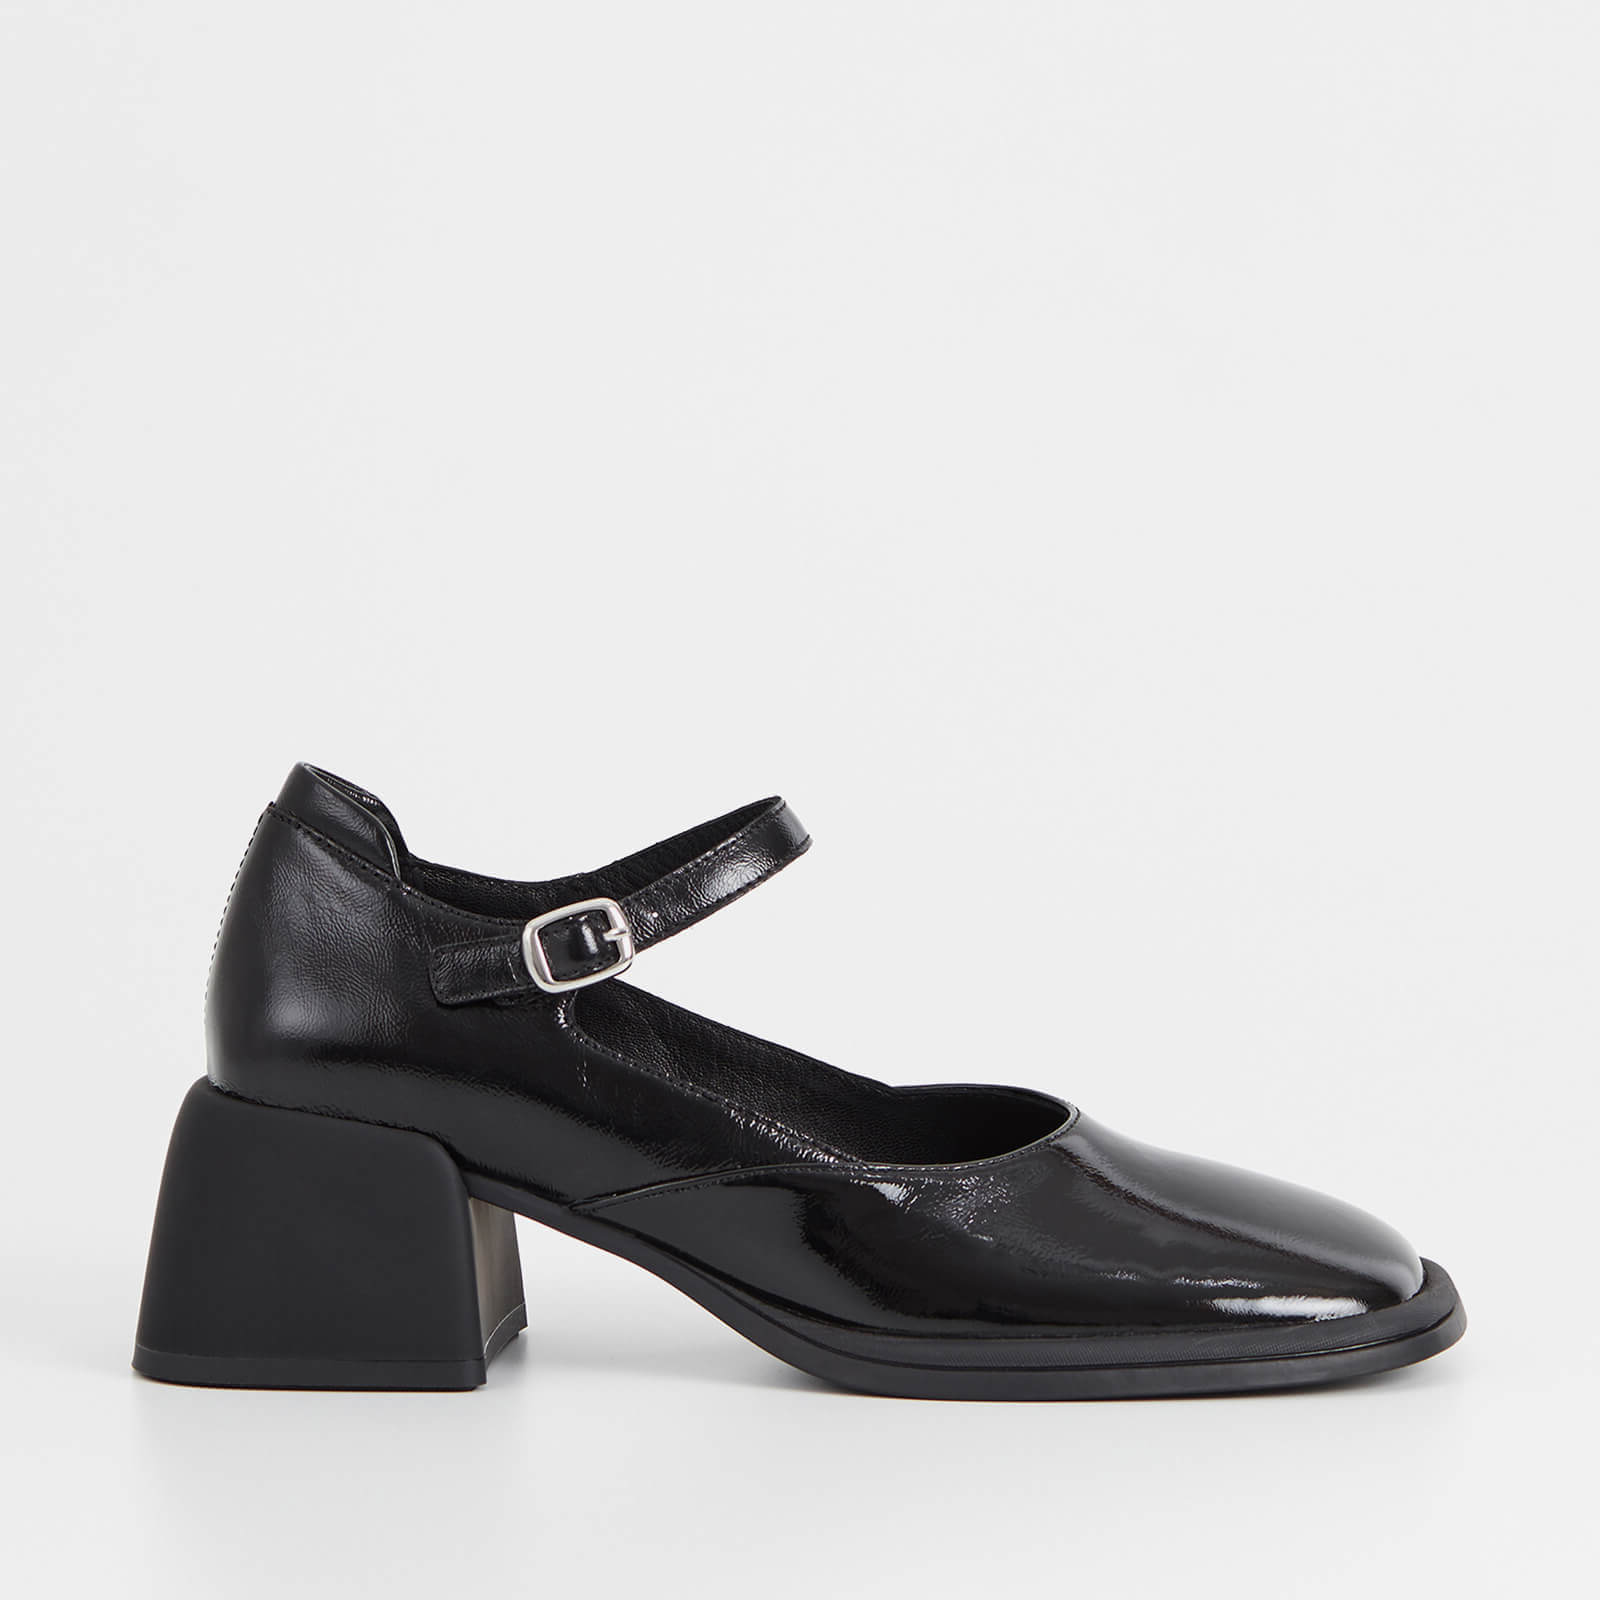 Vagabond Ansie Patent Leather Mary Jane Shoes product